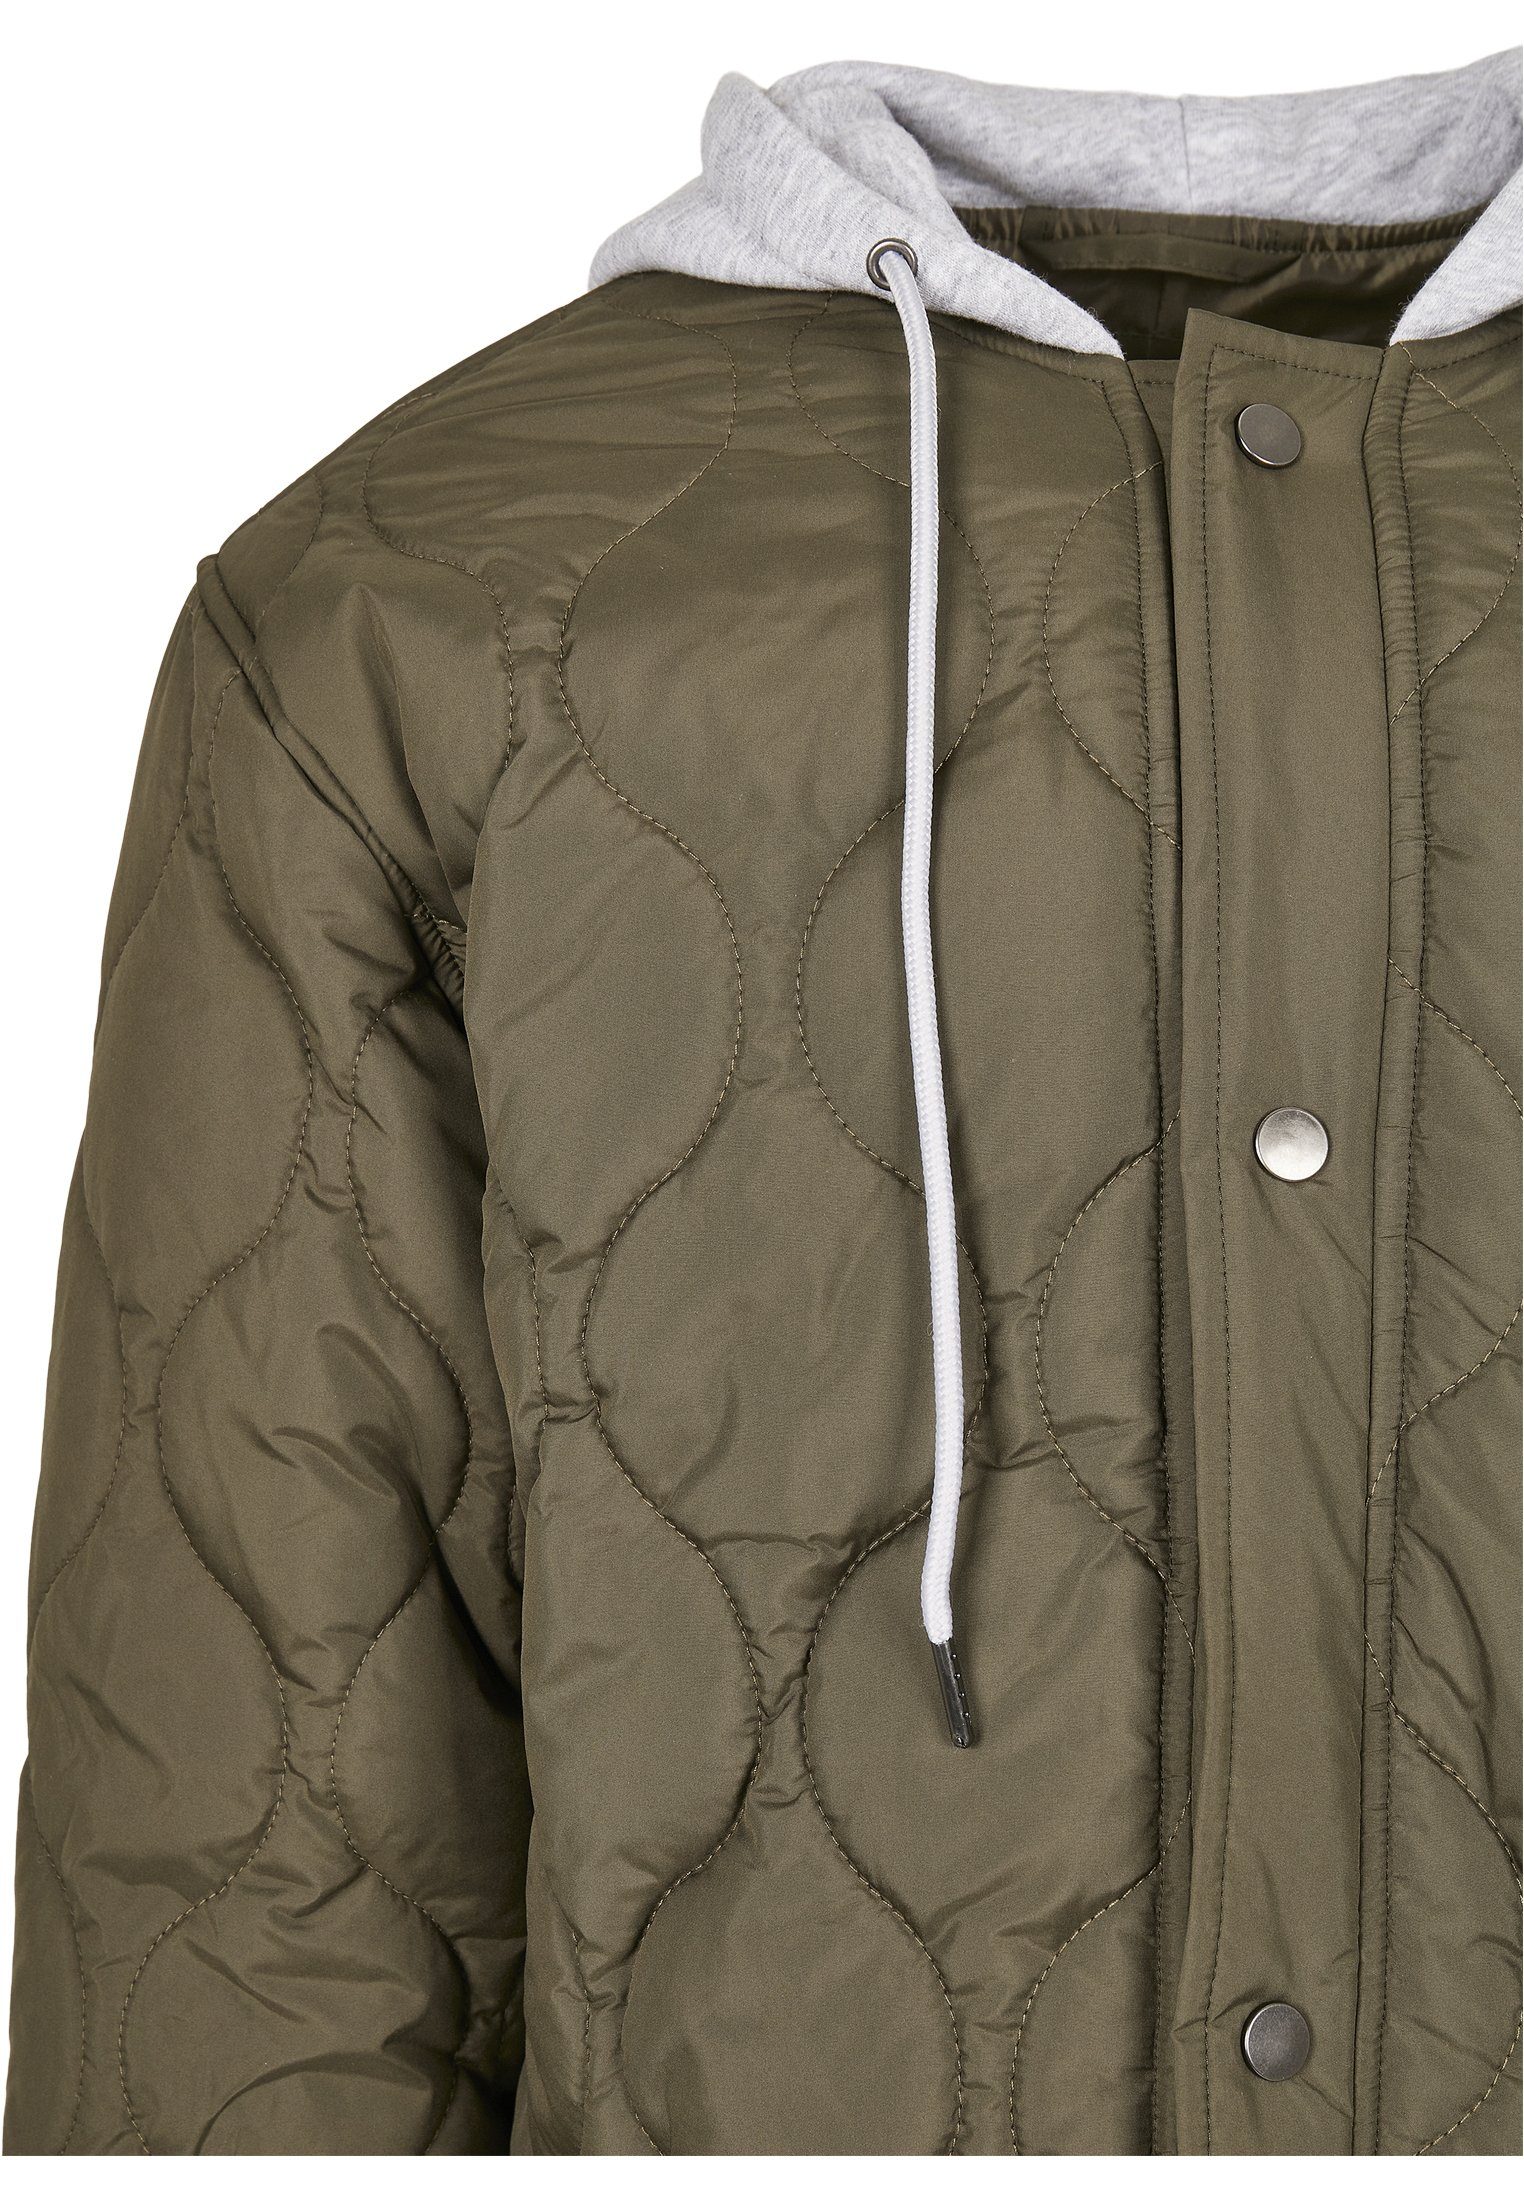 CLASSICS Jacket Hooded Outdoorjacke Männer Quilted URBAN (1-St)